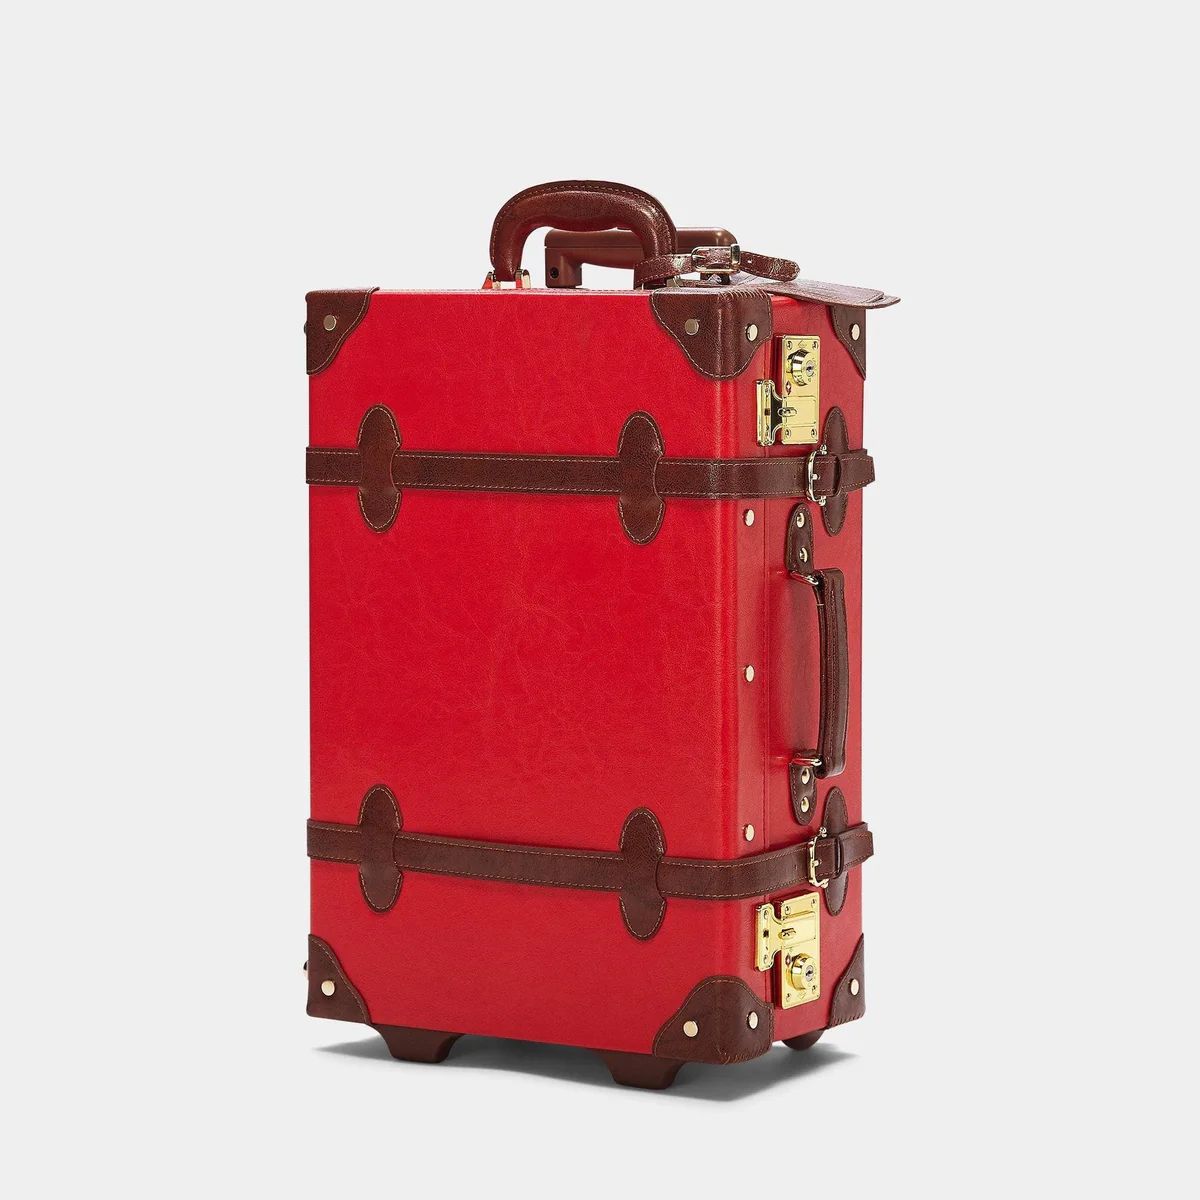 The Entrepreneur - Red Carryon | Steamline Luggage